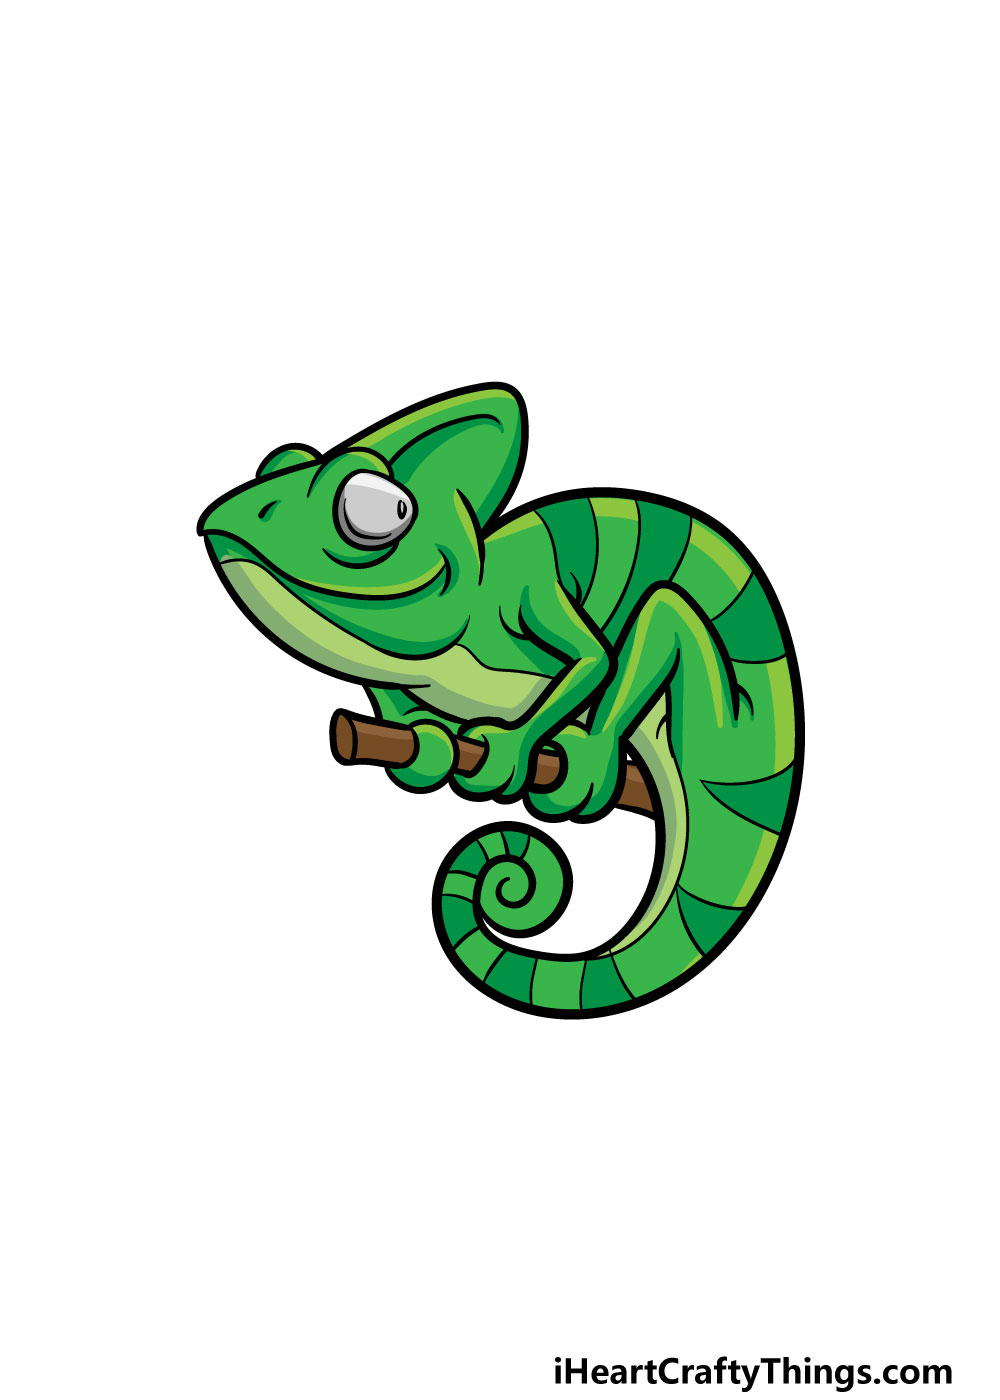 Chameleon Drawing - How To Draw A Chameleon Step By Step